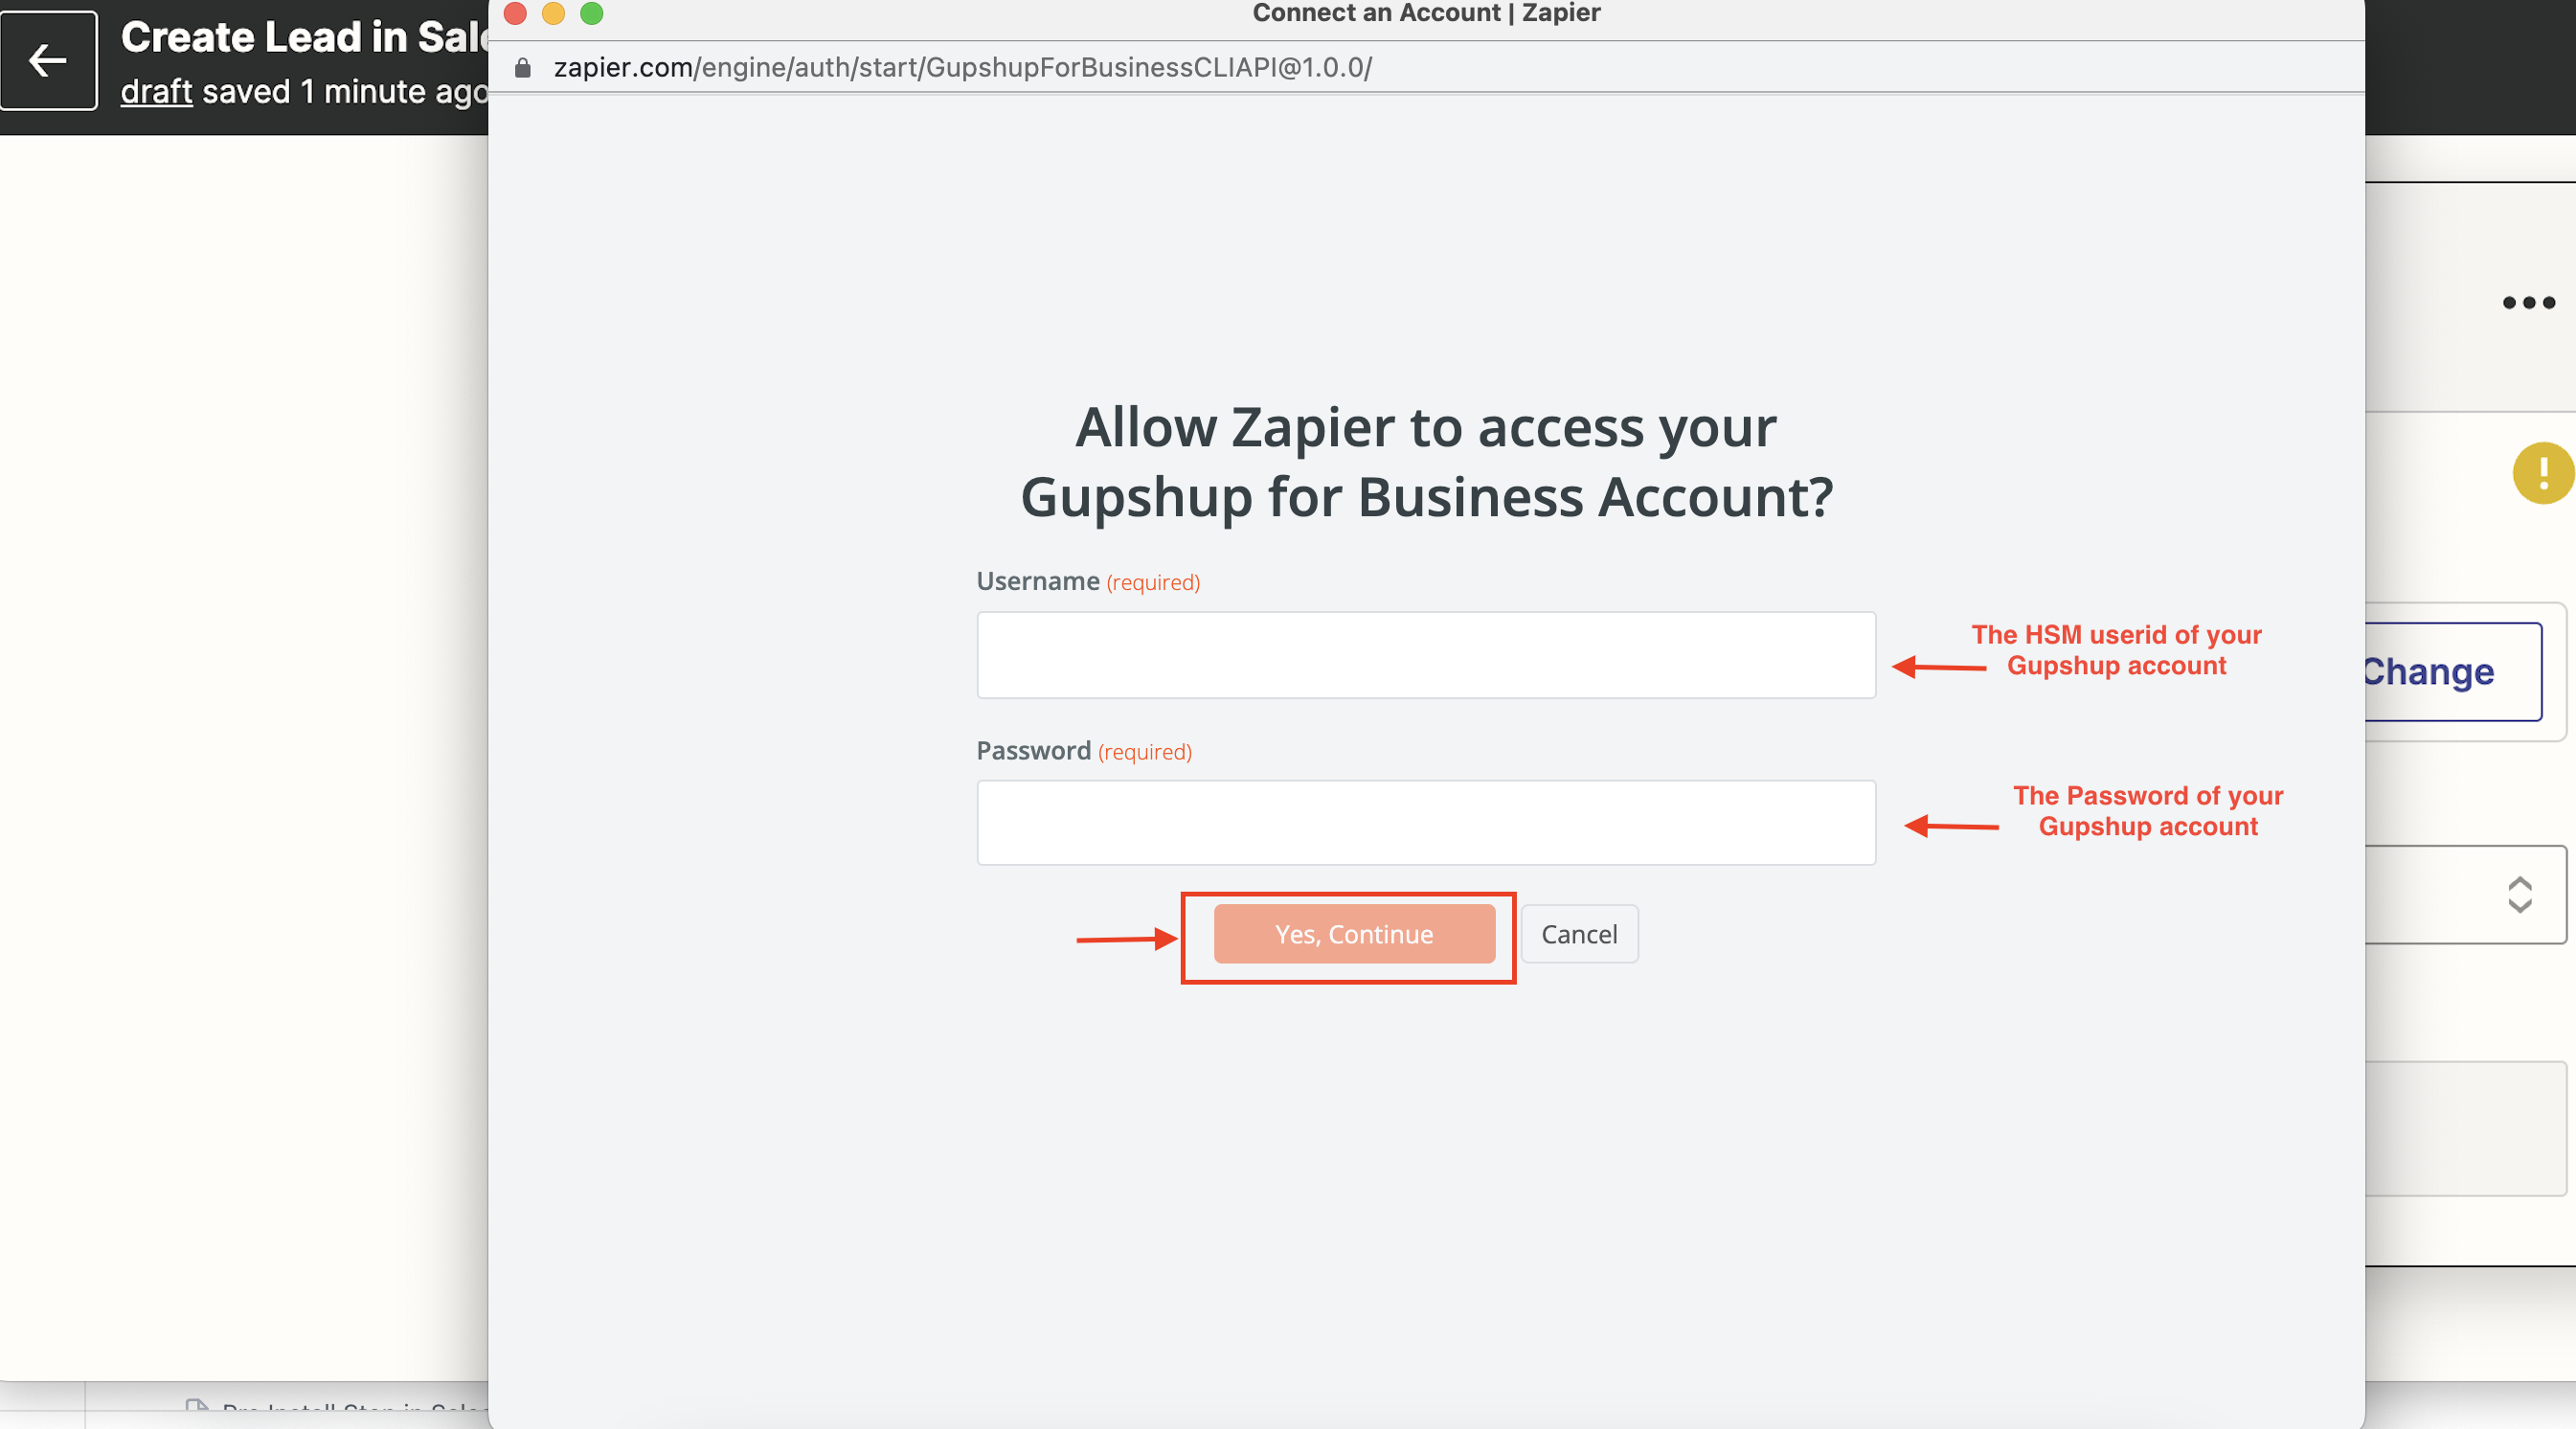 Create a new connection to your Gupshup WhatsApp Business account